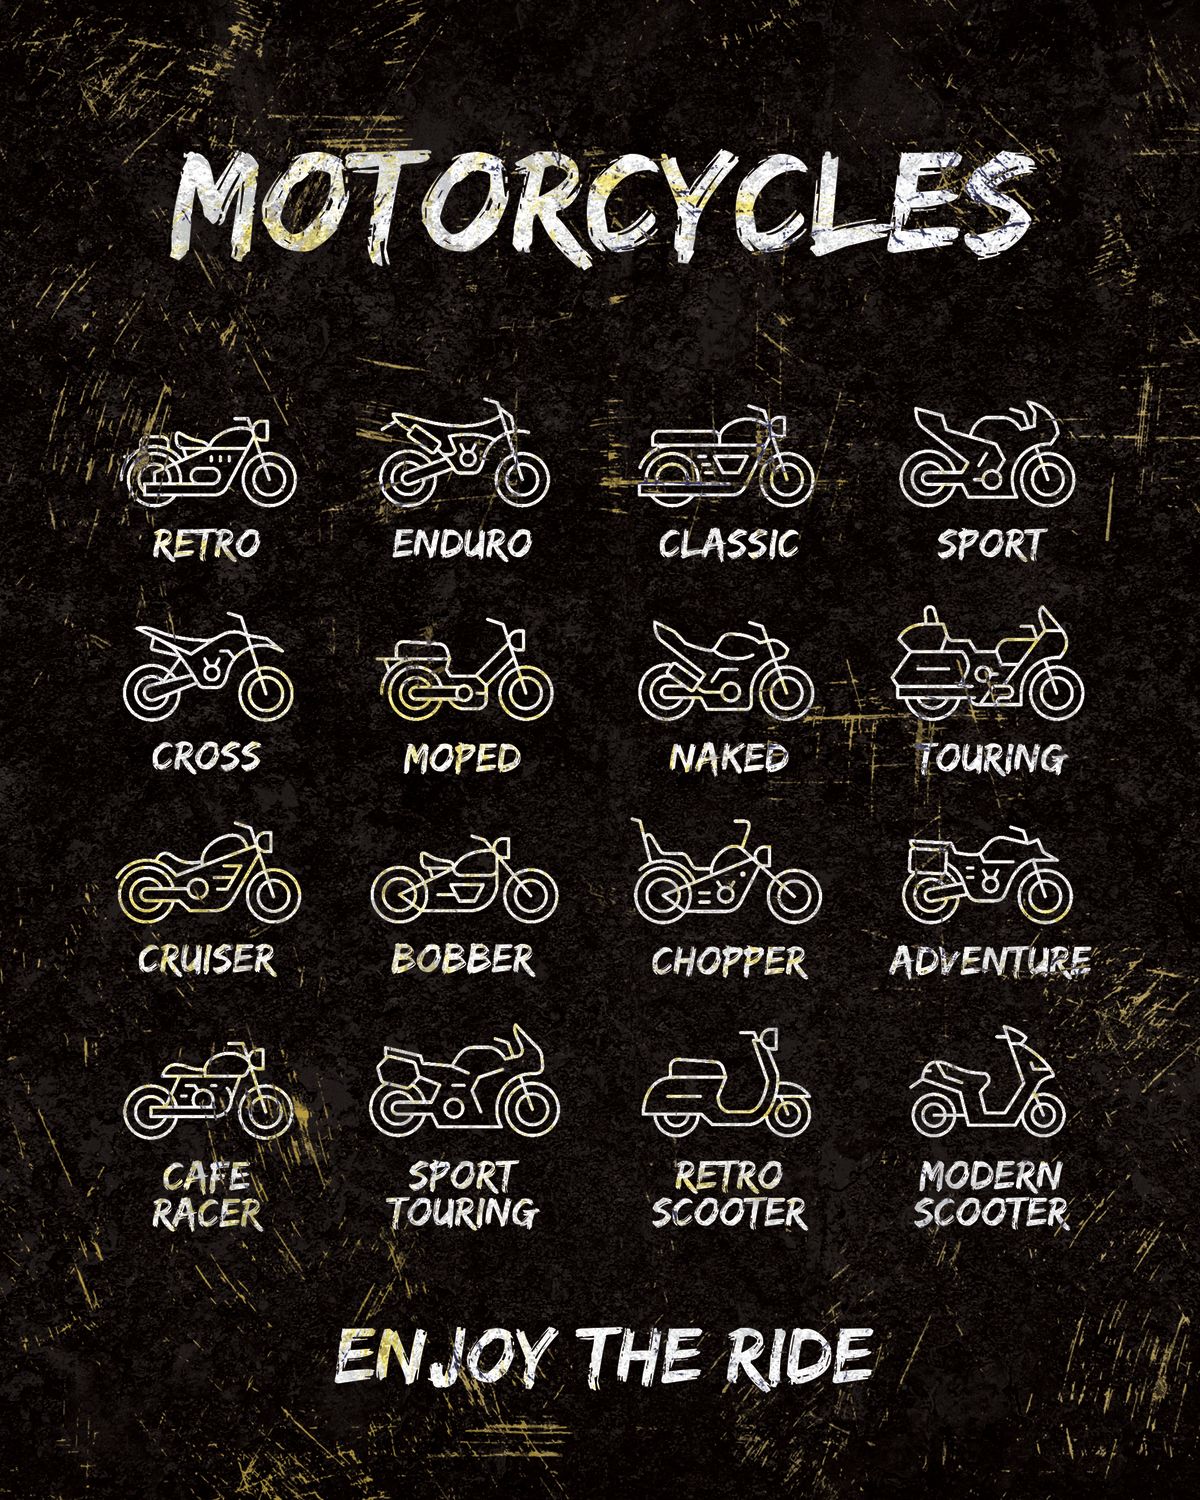 Motorcycles Chart